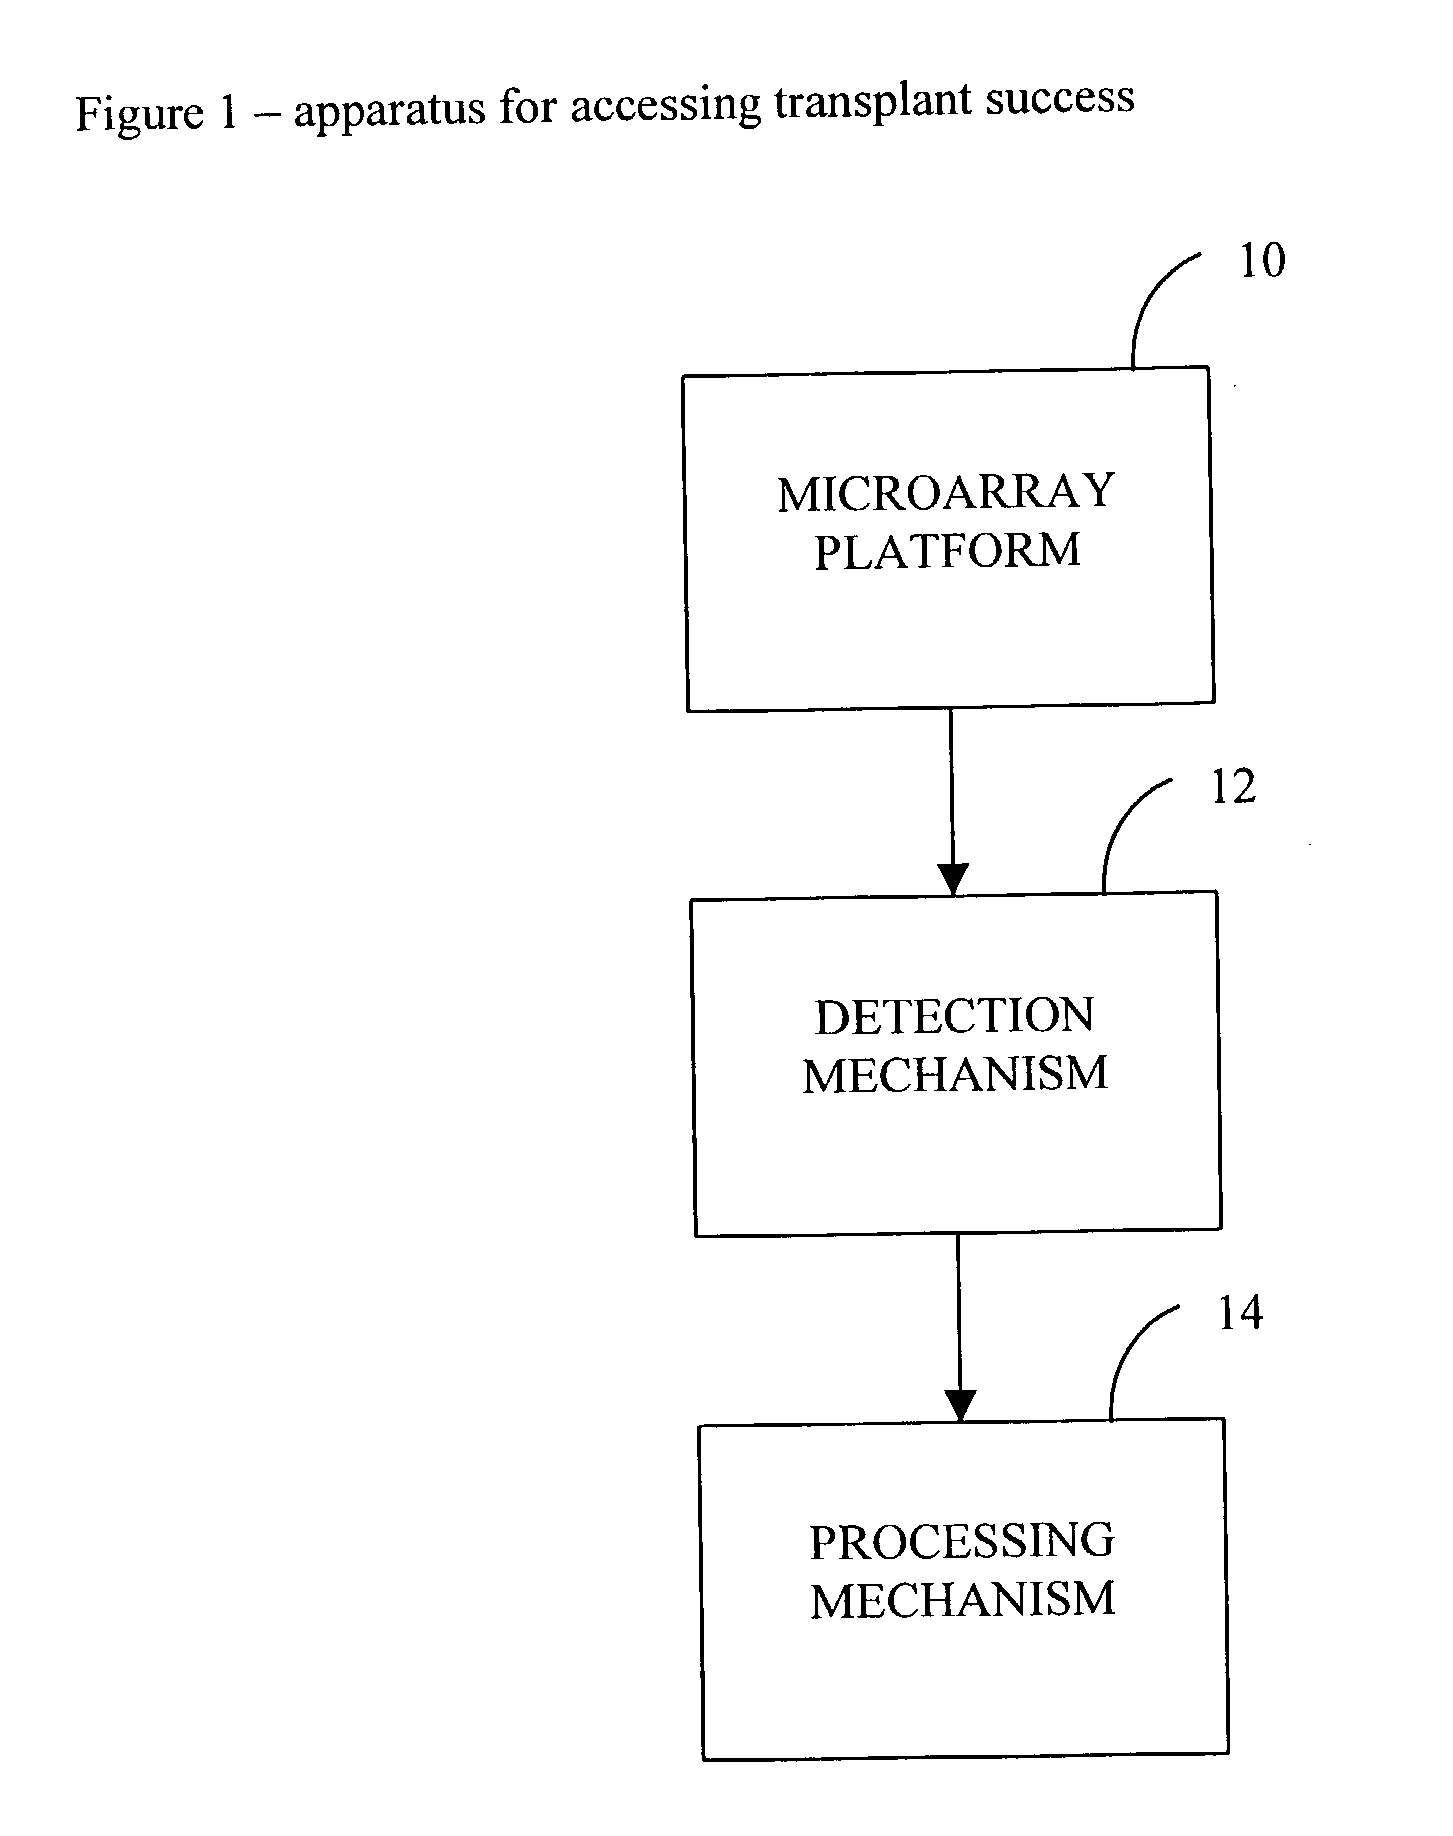 Method and use of protein microarray technology and proteomic analysis to determine efficacy of human and xenographic cell, tissue and organ transplant